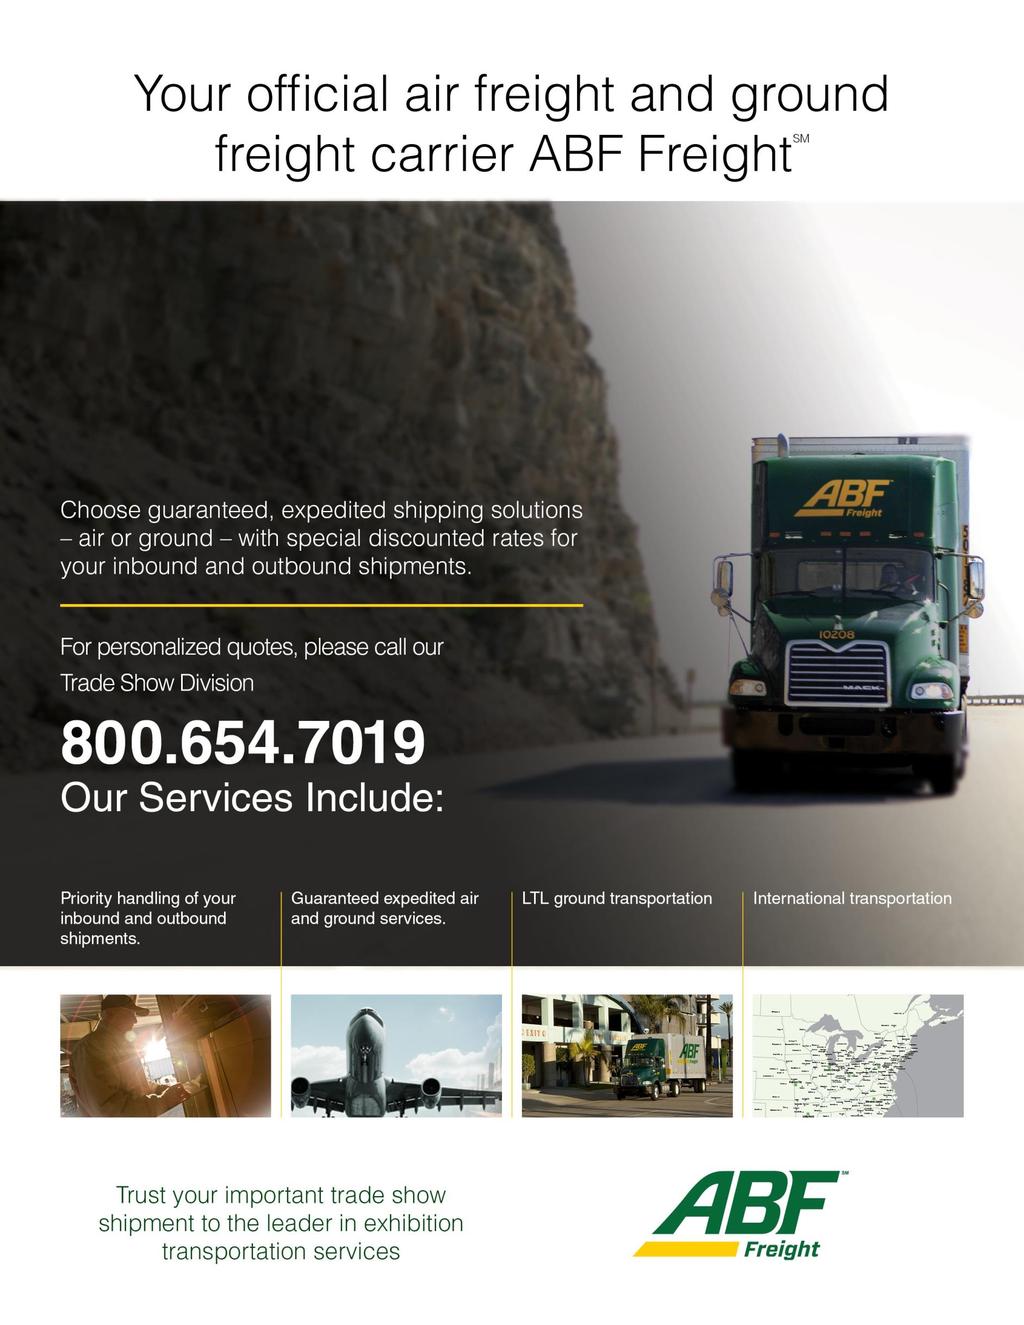 Let ABF Freight make your next trade show the easiest you have attended!